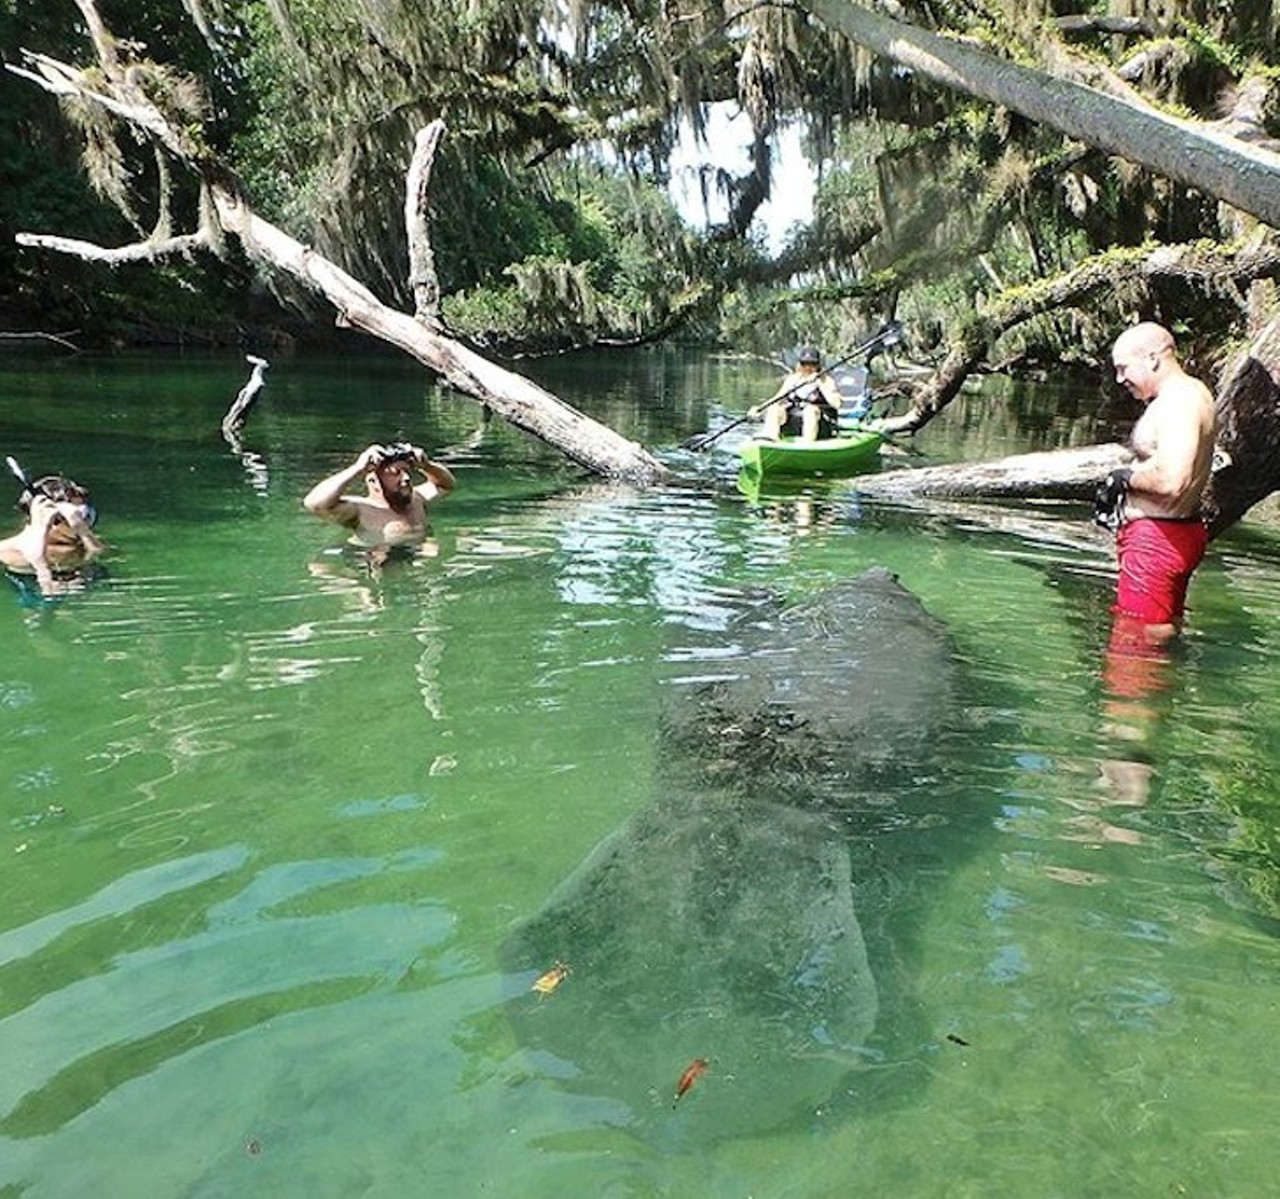 Blue Springs
2100 W. French Ave., Orange City, FL 32763
50 minutes from Orlando
Claiming the title of the biggest spring found on the St. John&#146;s River, this stop on the list is manatee heaven from the middle of November until the end of March. Any in-water activity is put to a halt during this time, but once the park fully reopens, attendees can enjoy some snorkeling, boating, fishing, tubing and, if you&#146;re certified, scuba diving.
Photo via leandromagno1 on Instagram